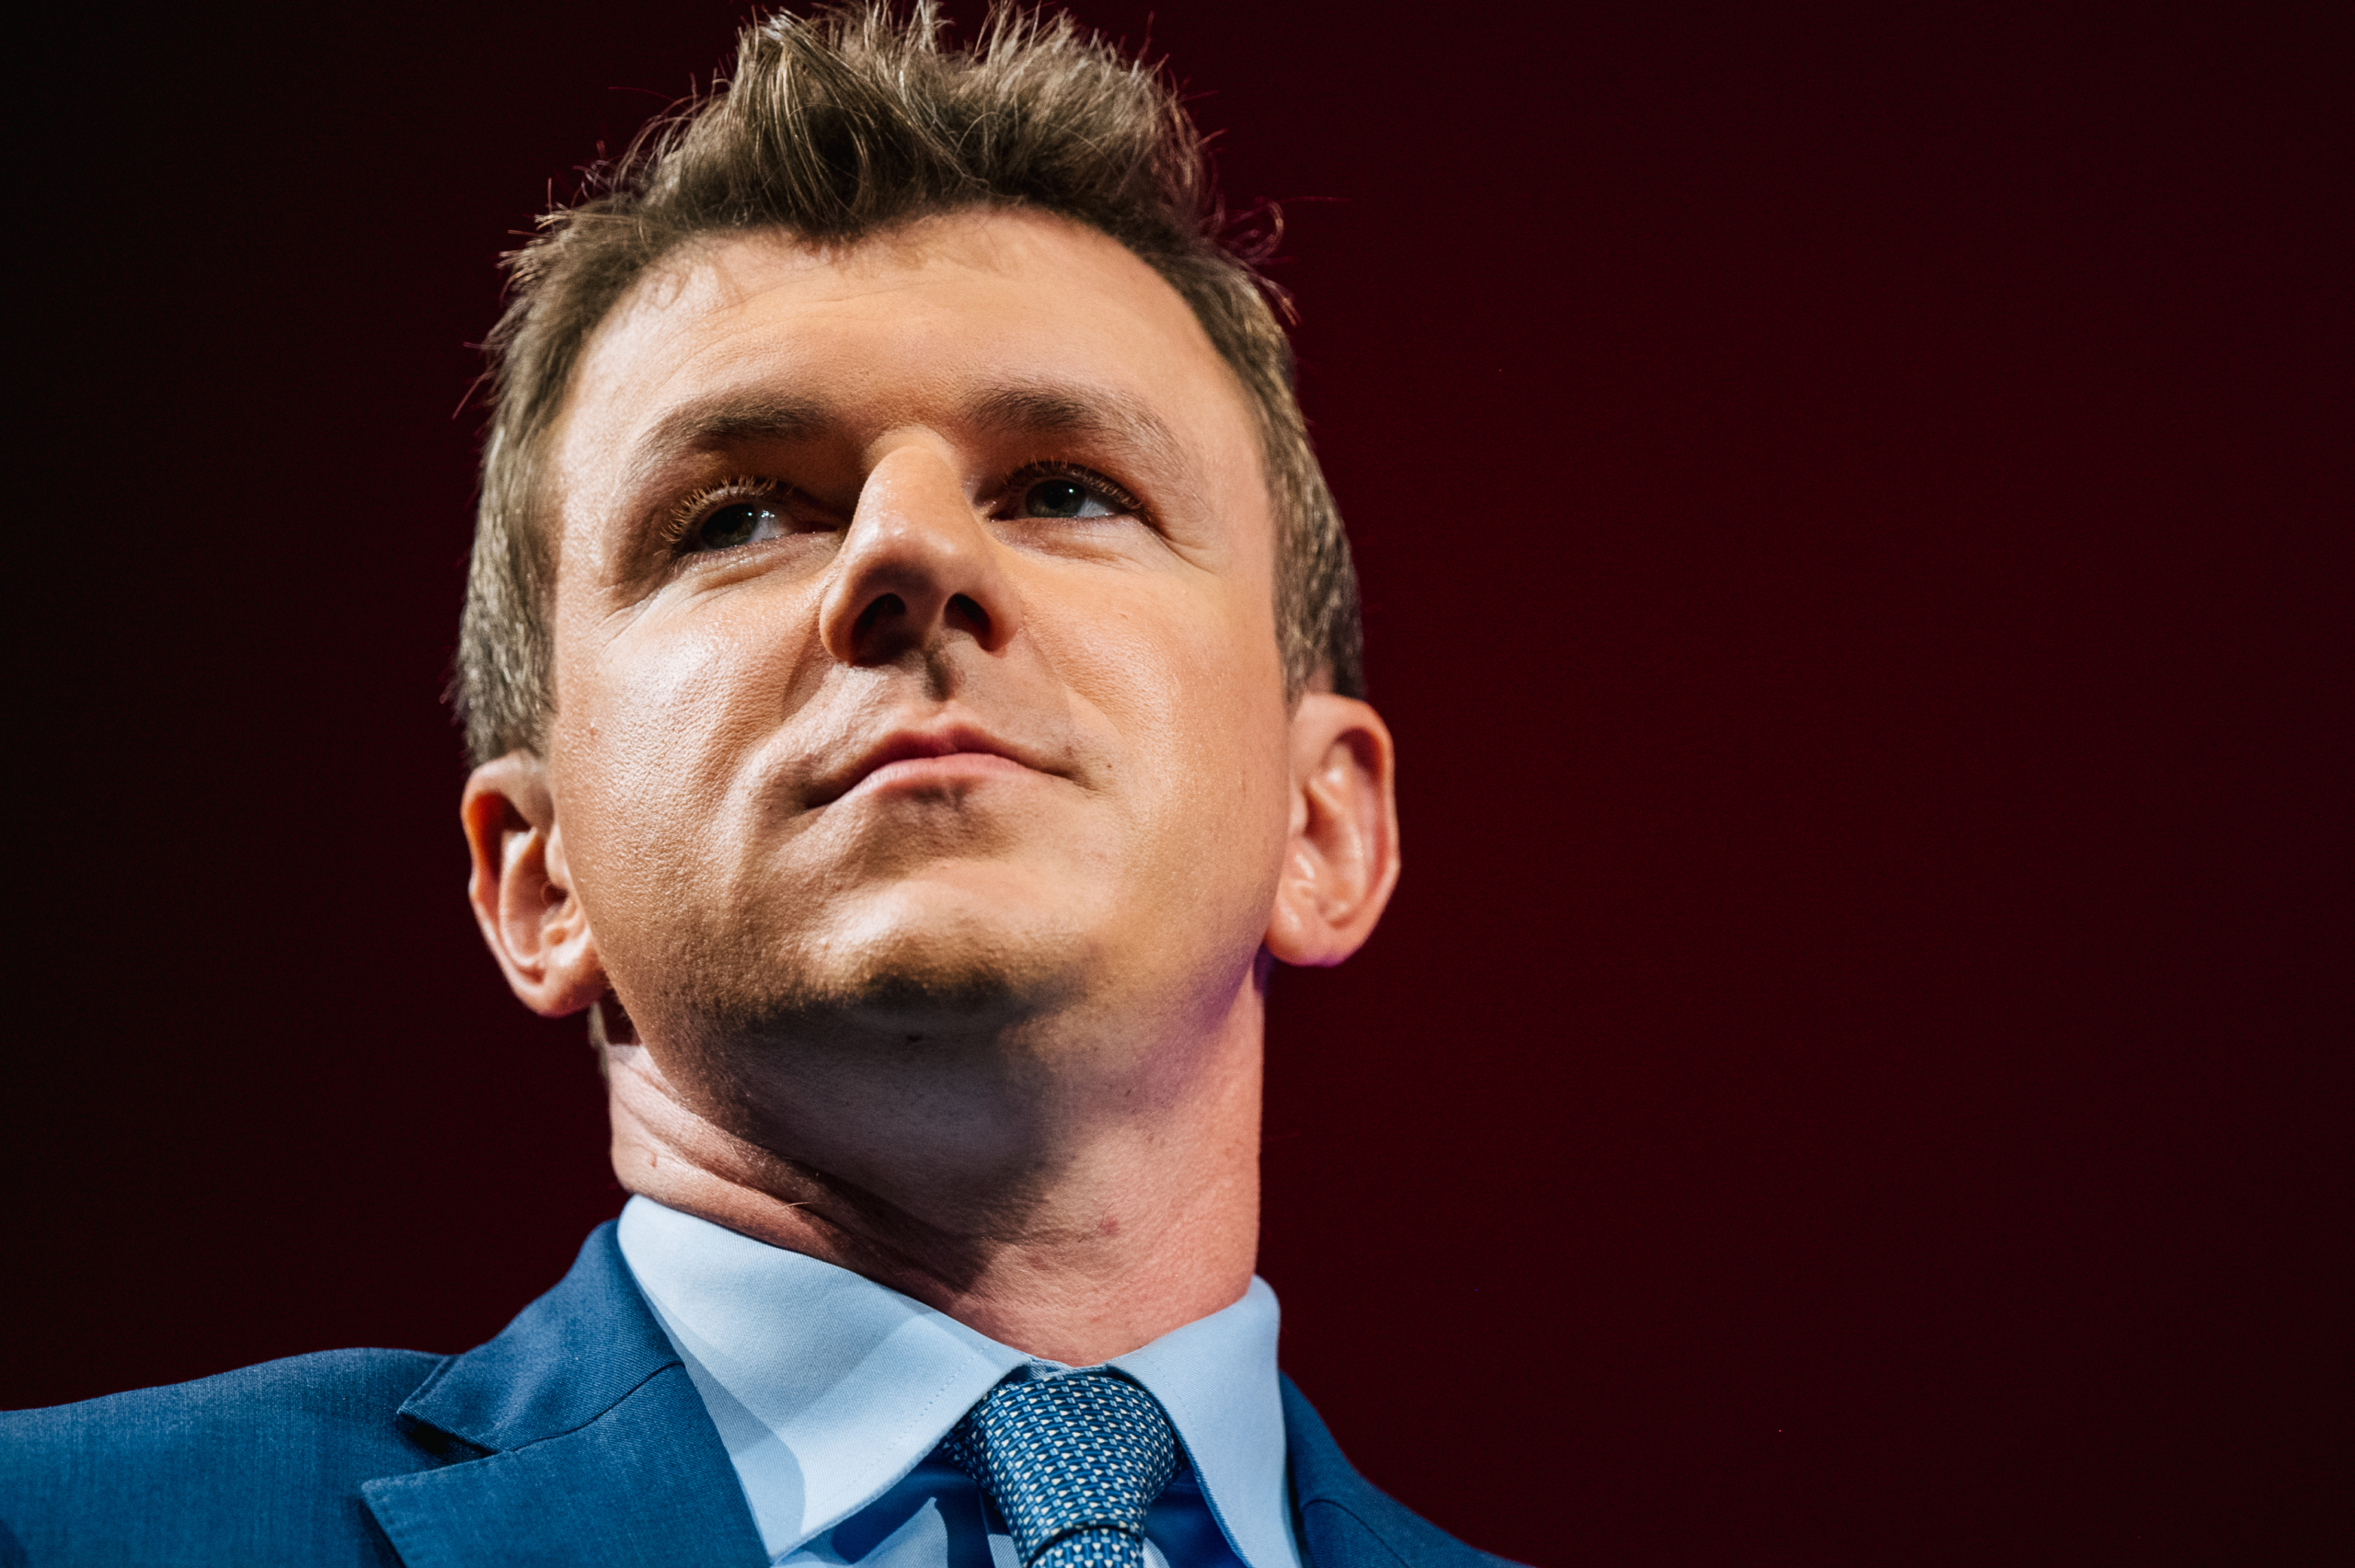 Project Veritas battles for journalism, and against it